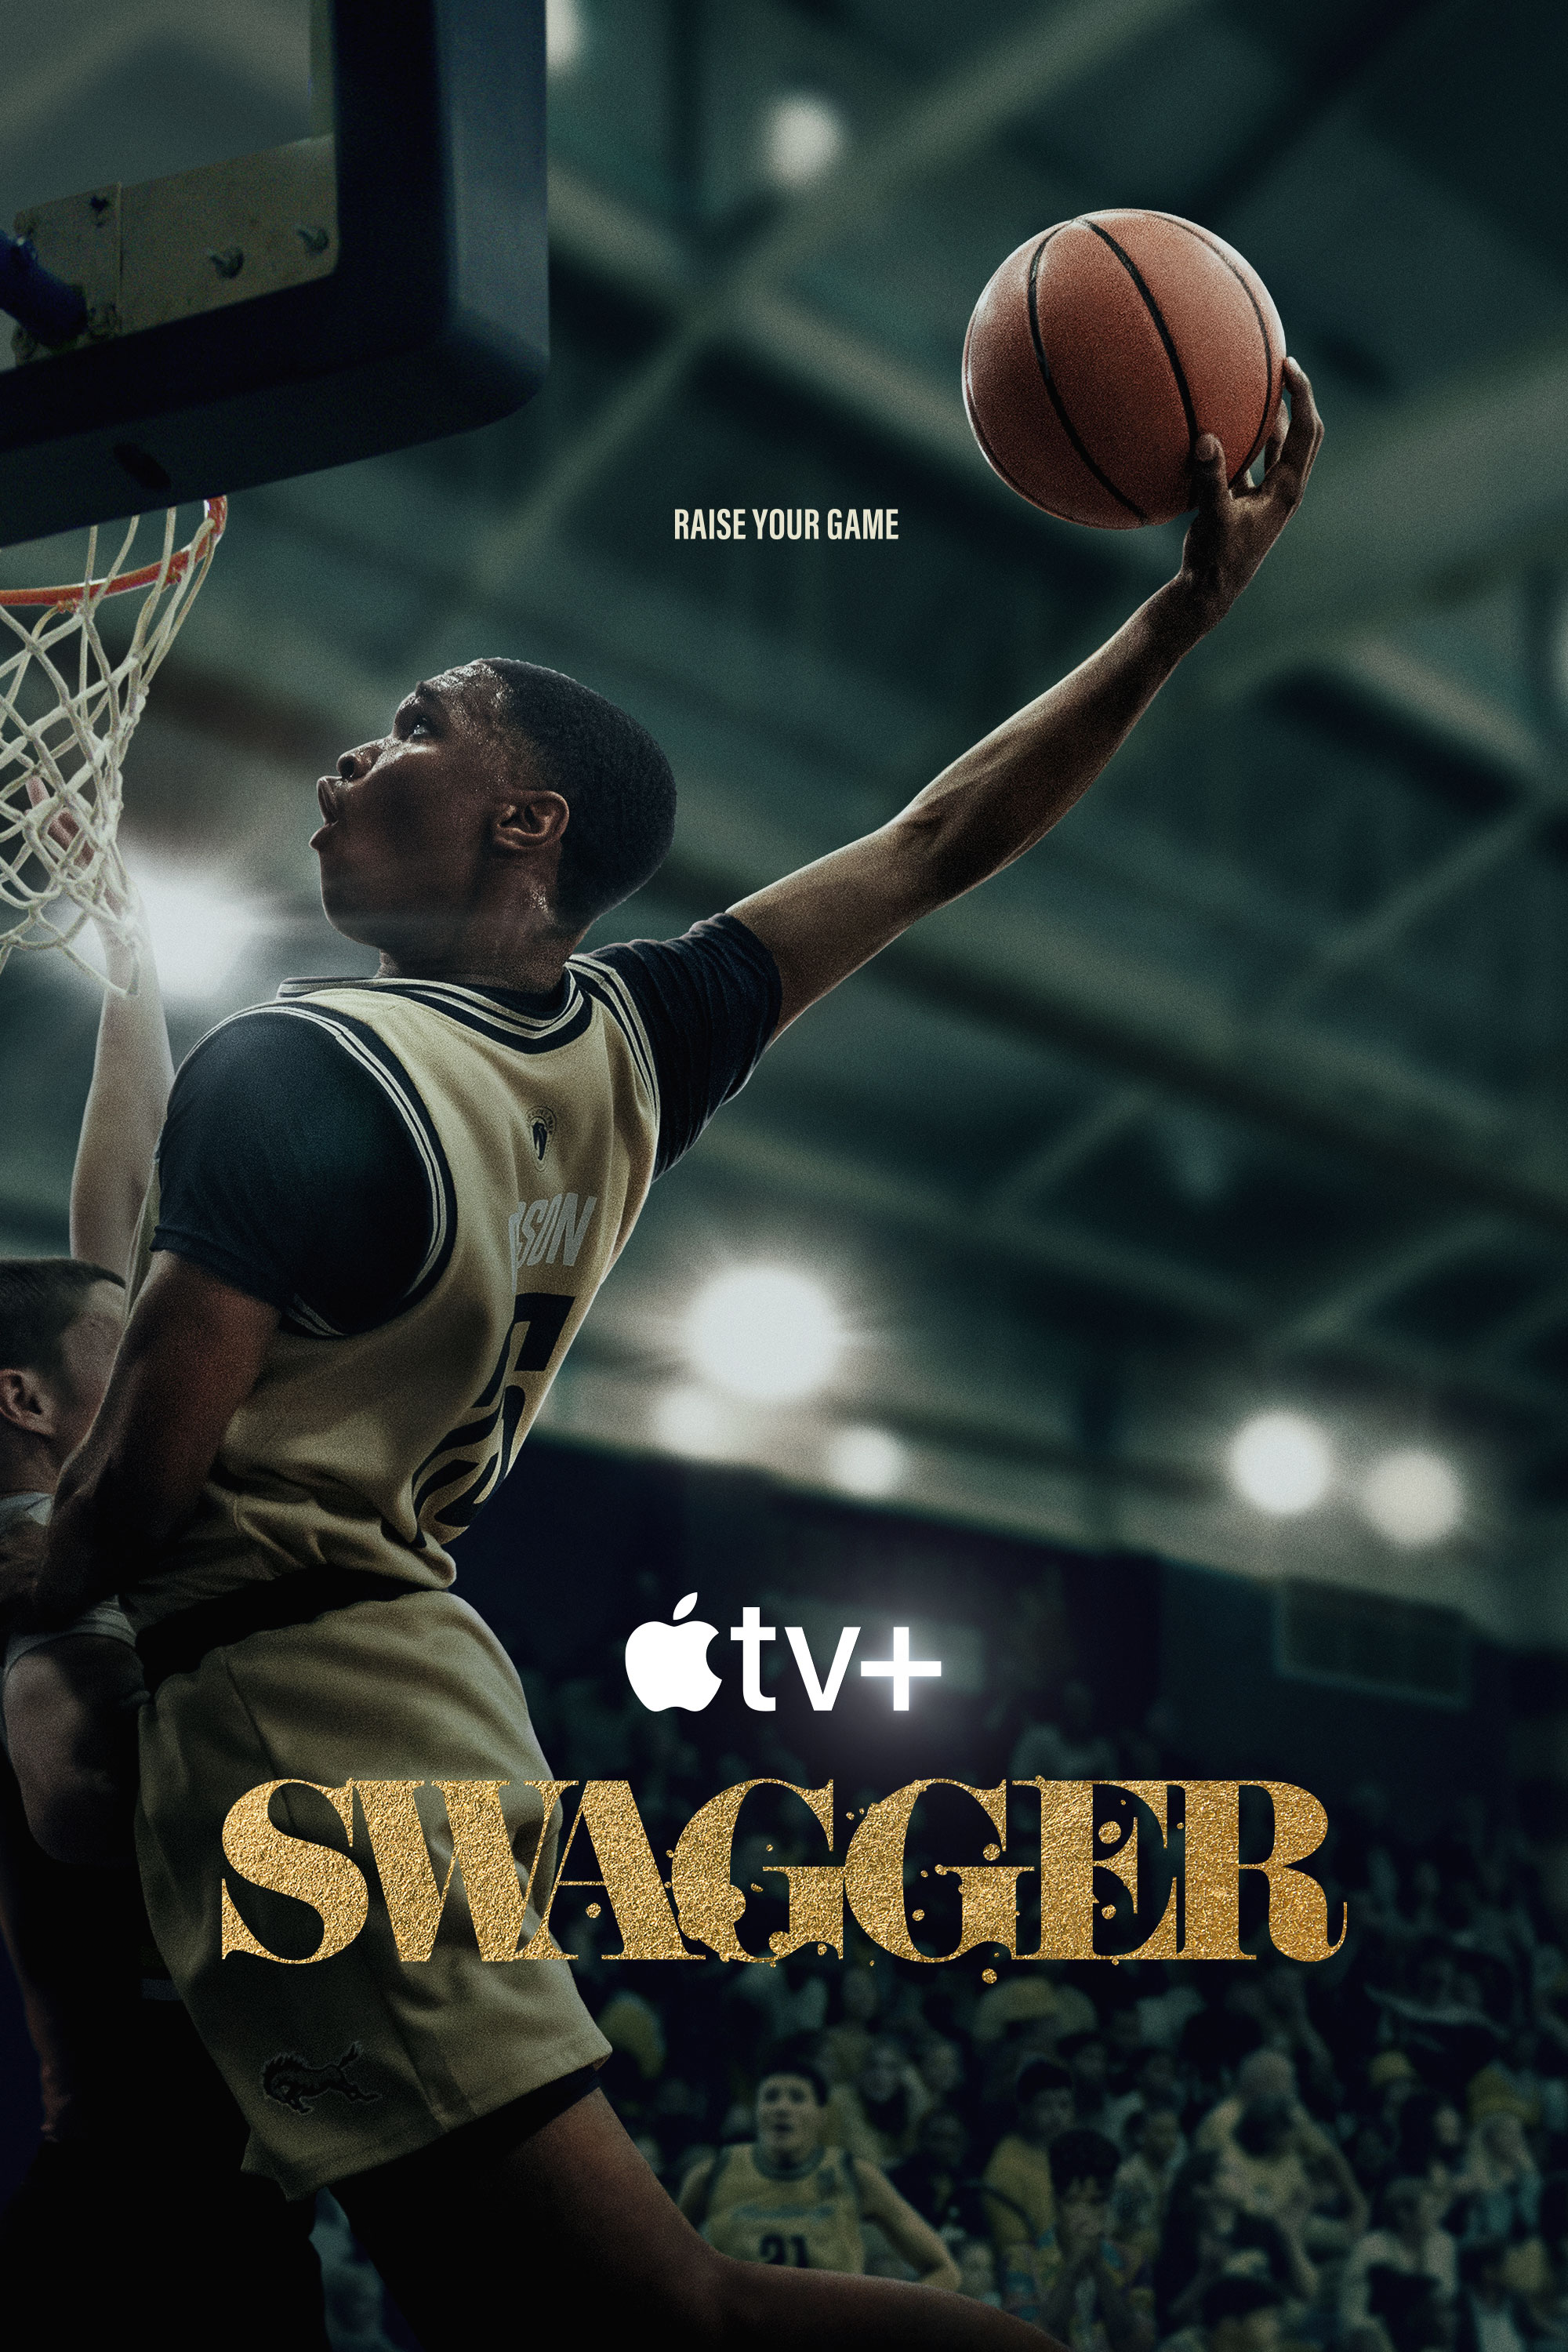 Apple TV+ also canceled a basketball drama called Swagger